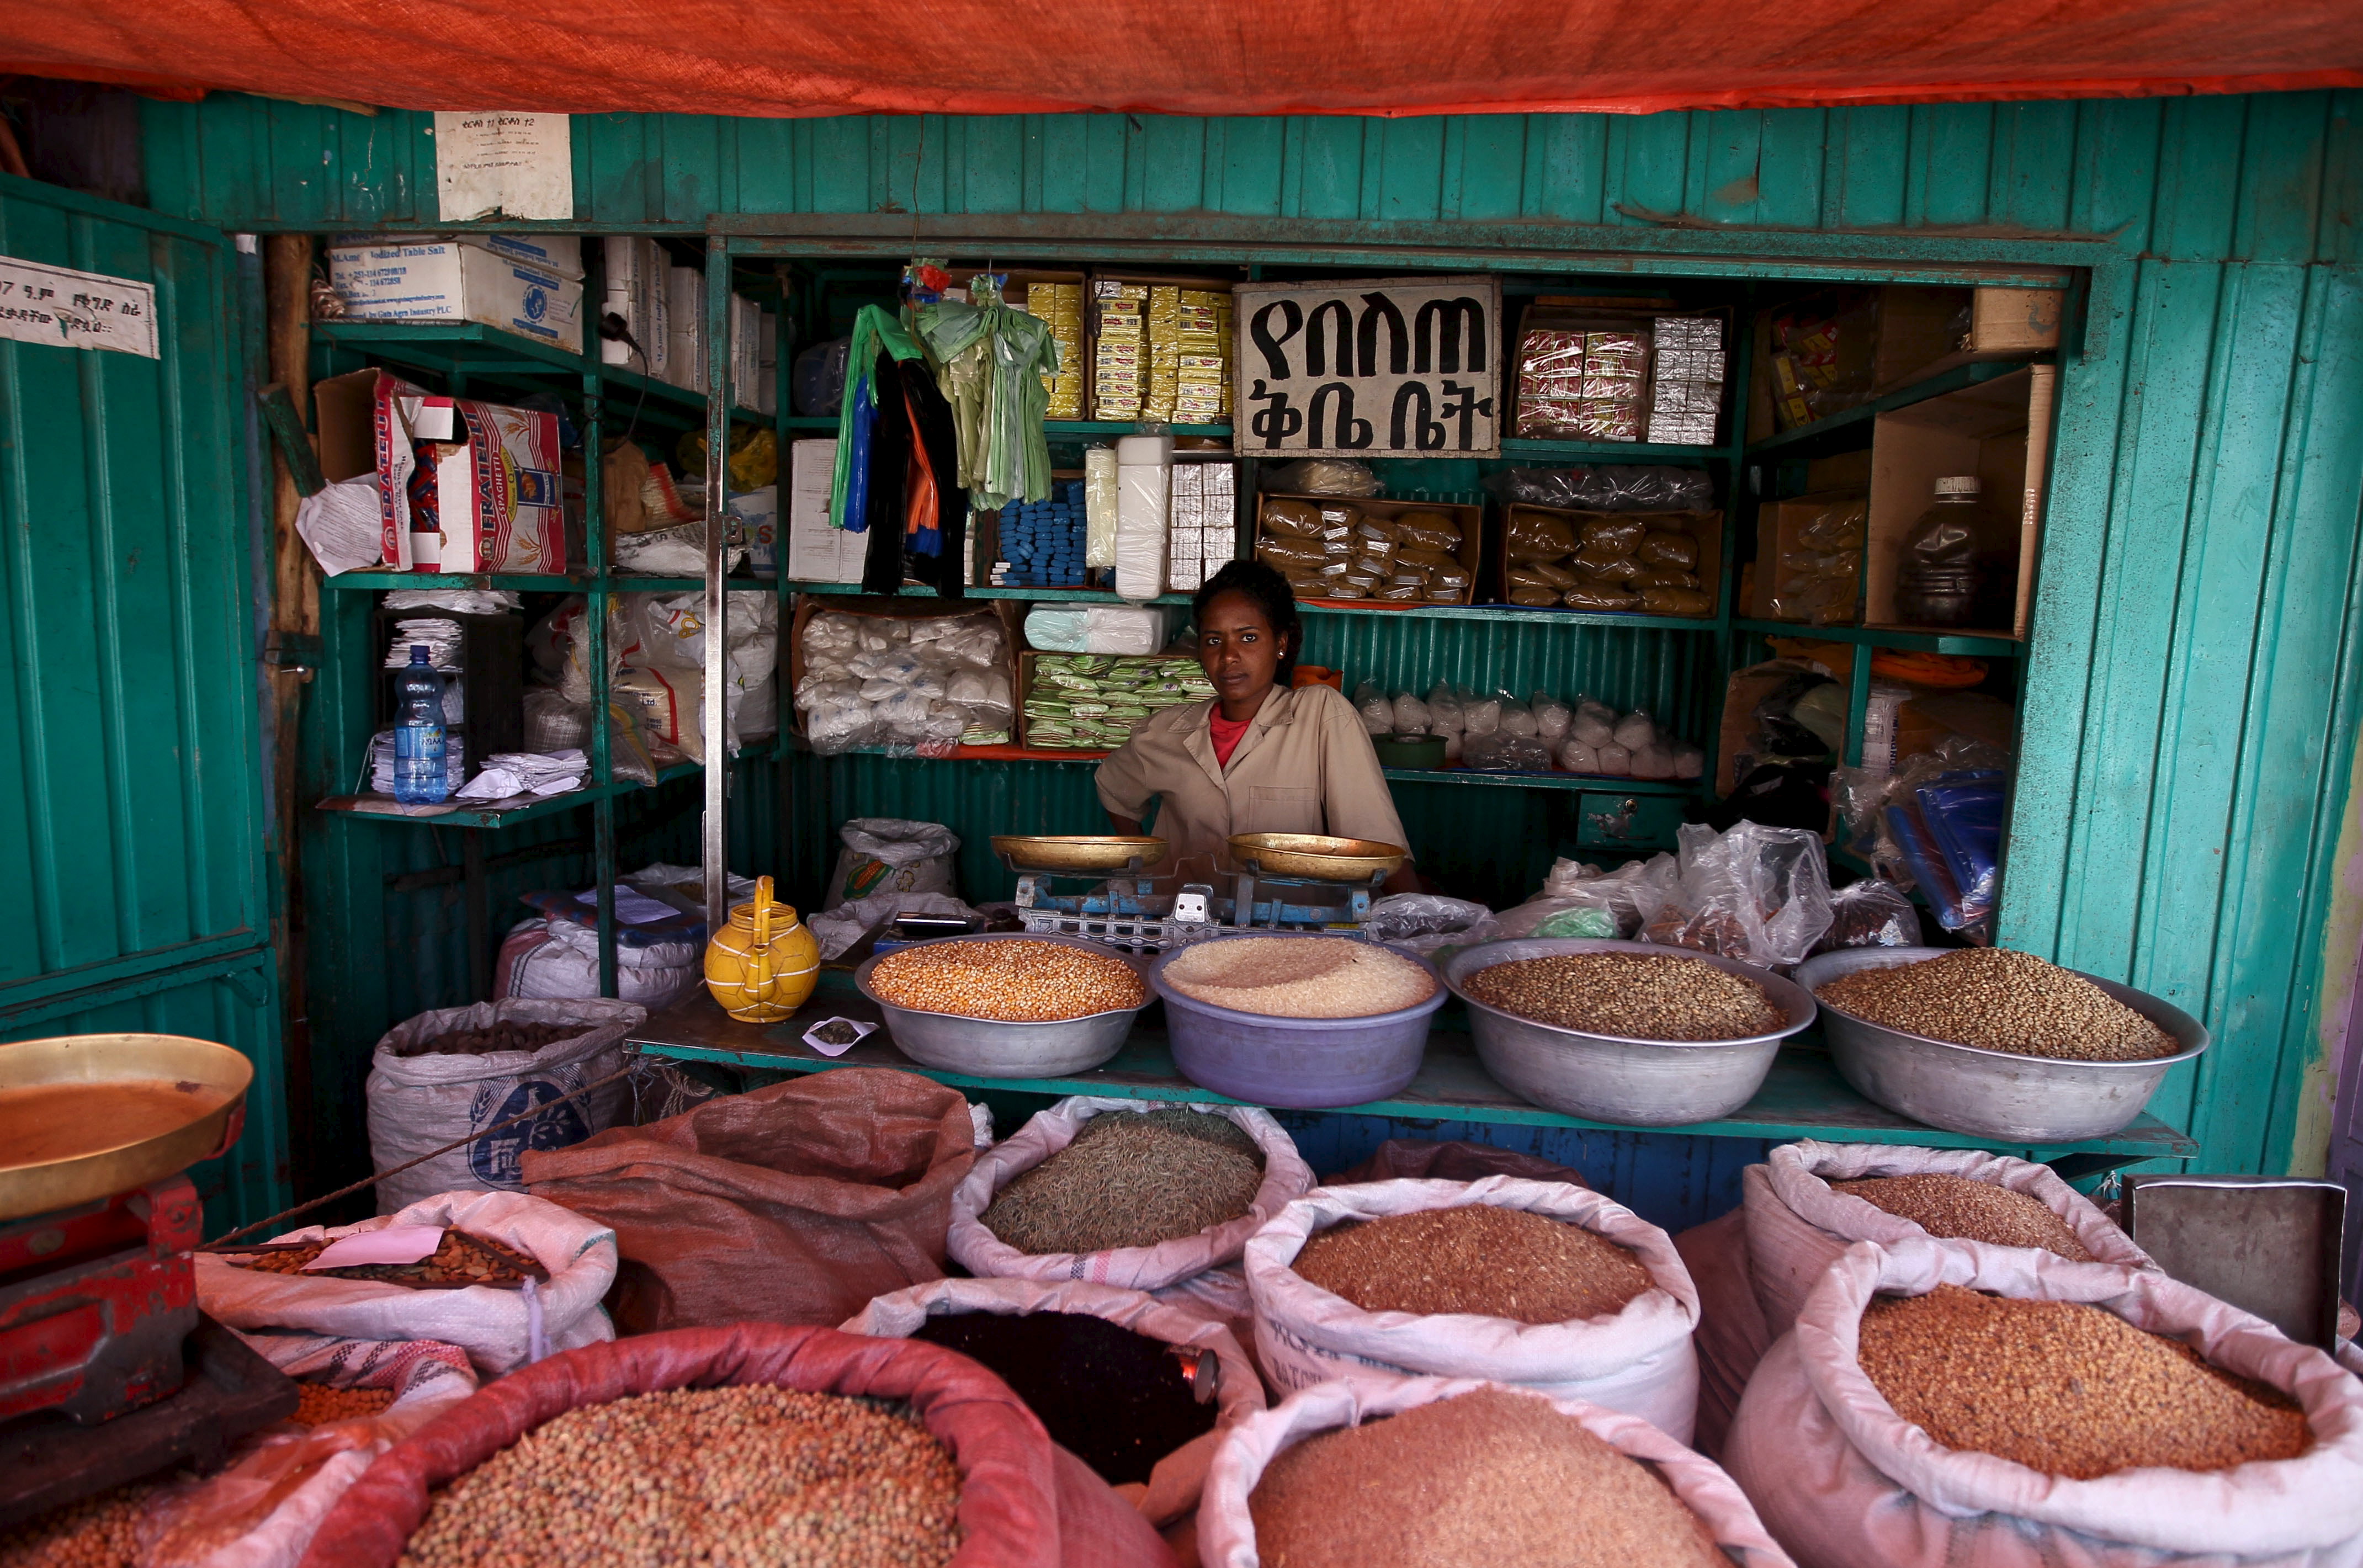 A shop owner poses for a photograph at the Mercato market in Addis Ababa